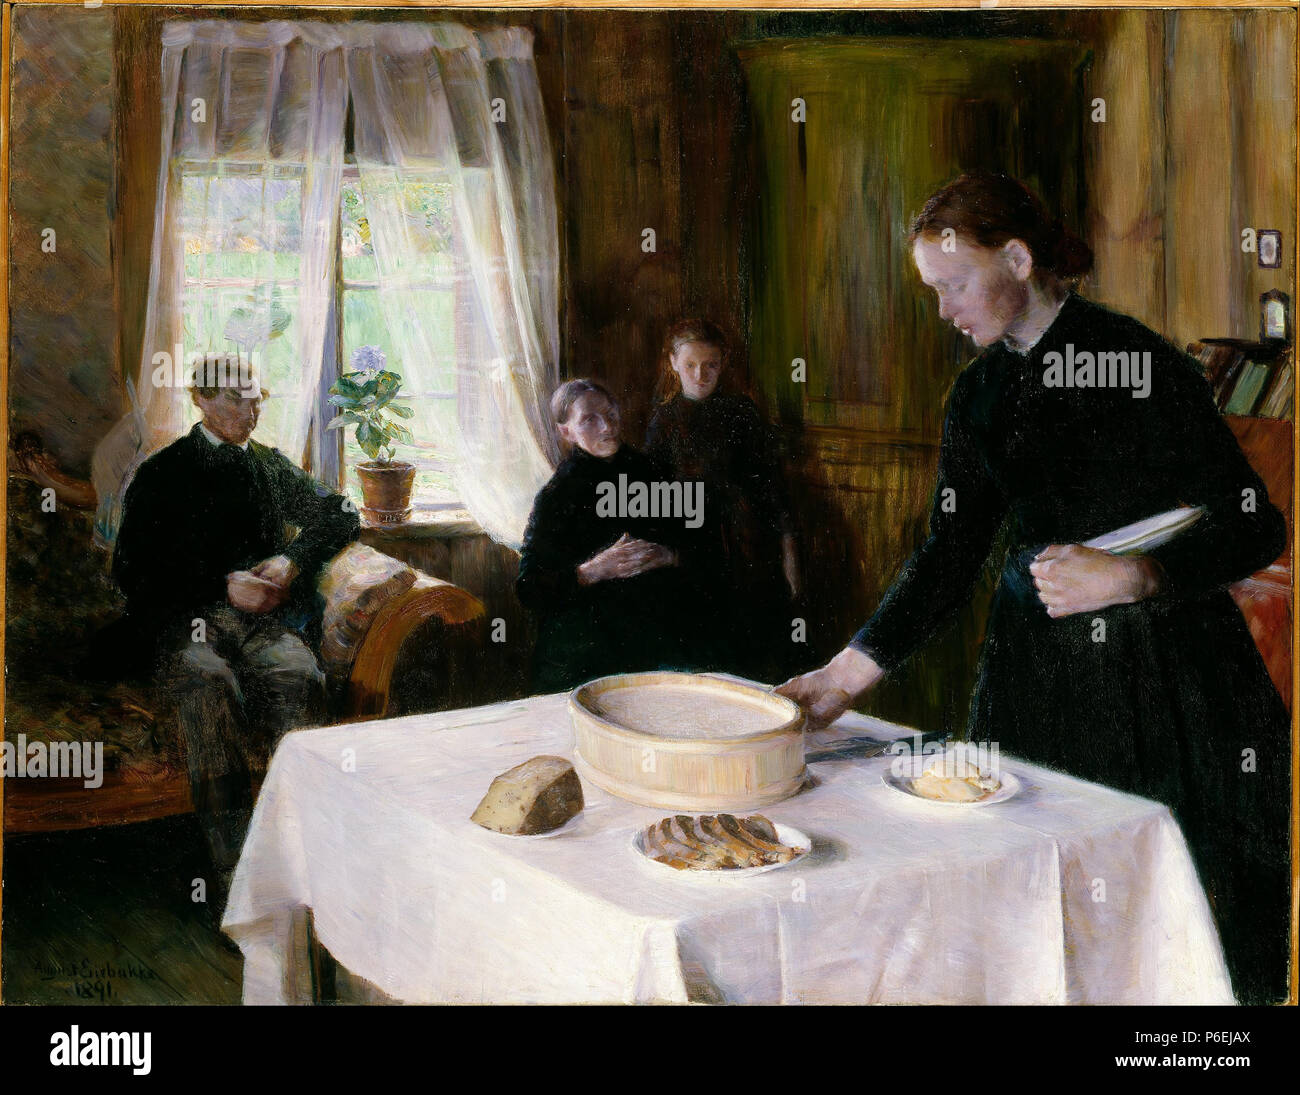 .  English: Laying the Table  1891 6 August Eiebakke - Laying the Table - Stock Photo